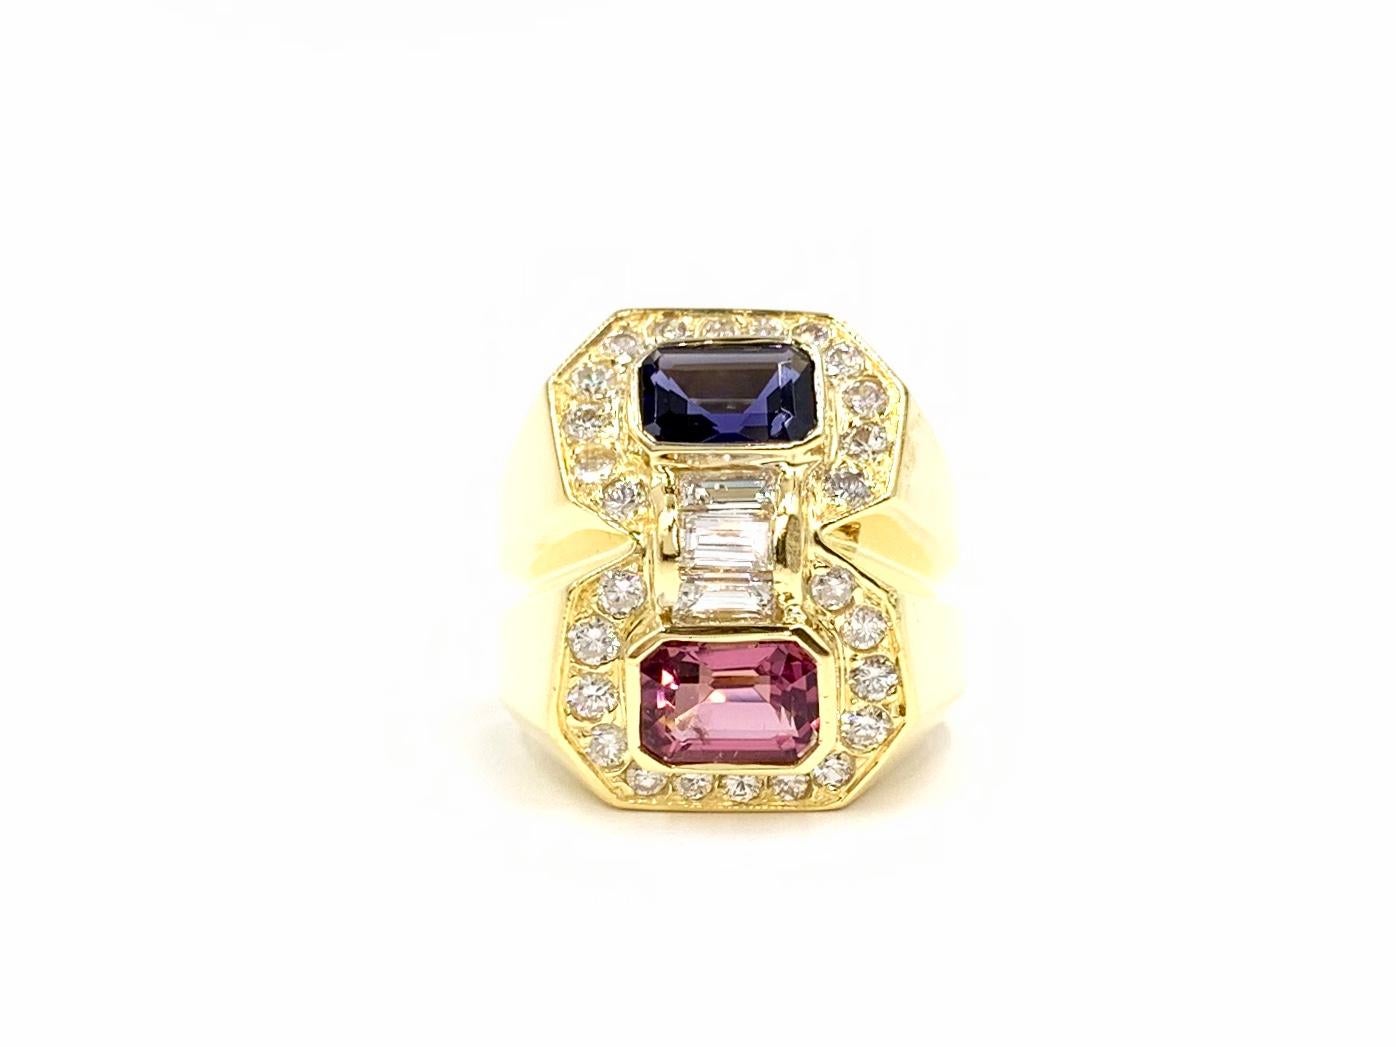 Very well made solid polished 18 karat yellow gold modern stacked moi et toi style ring featuring a vibrant pink tourmaline and deep purple-blue iolite and adorned with 1.13 carats of baguette and round brilliant cut diamonds. Diamond quality is